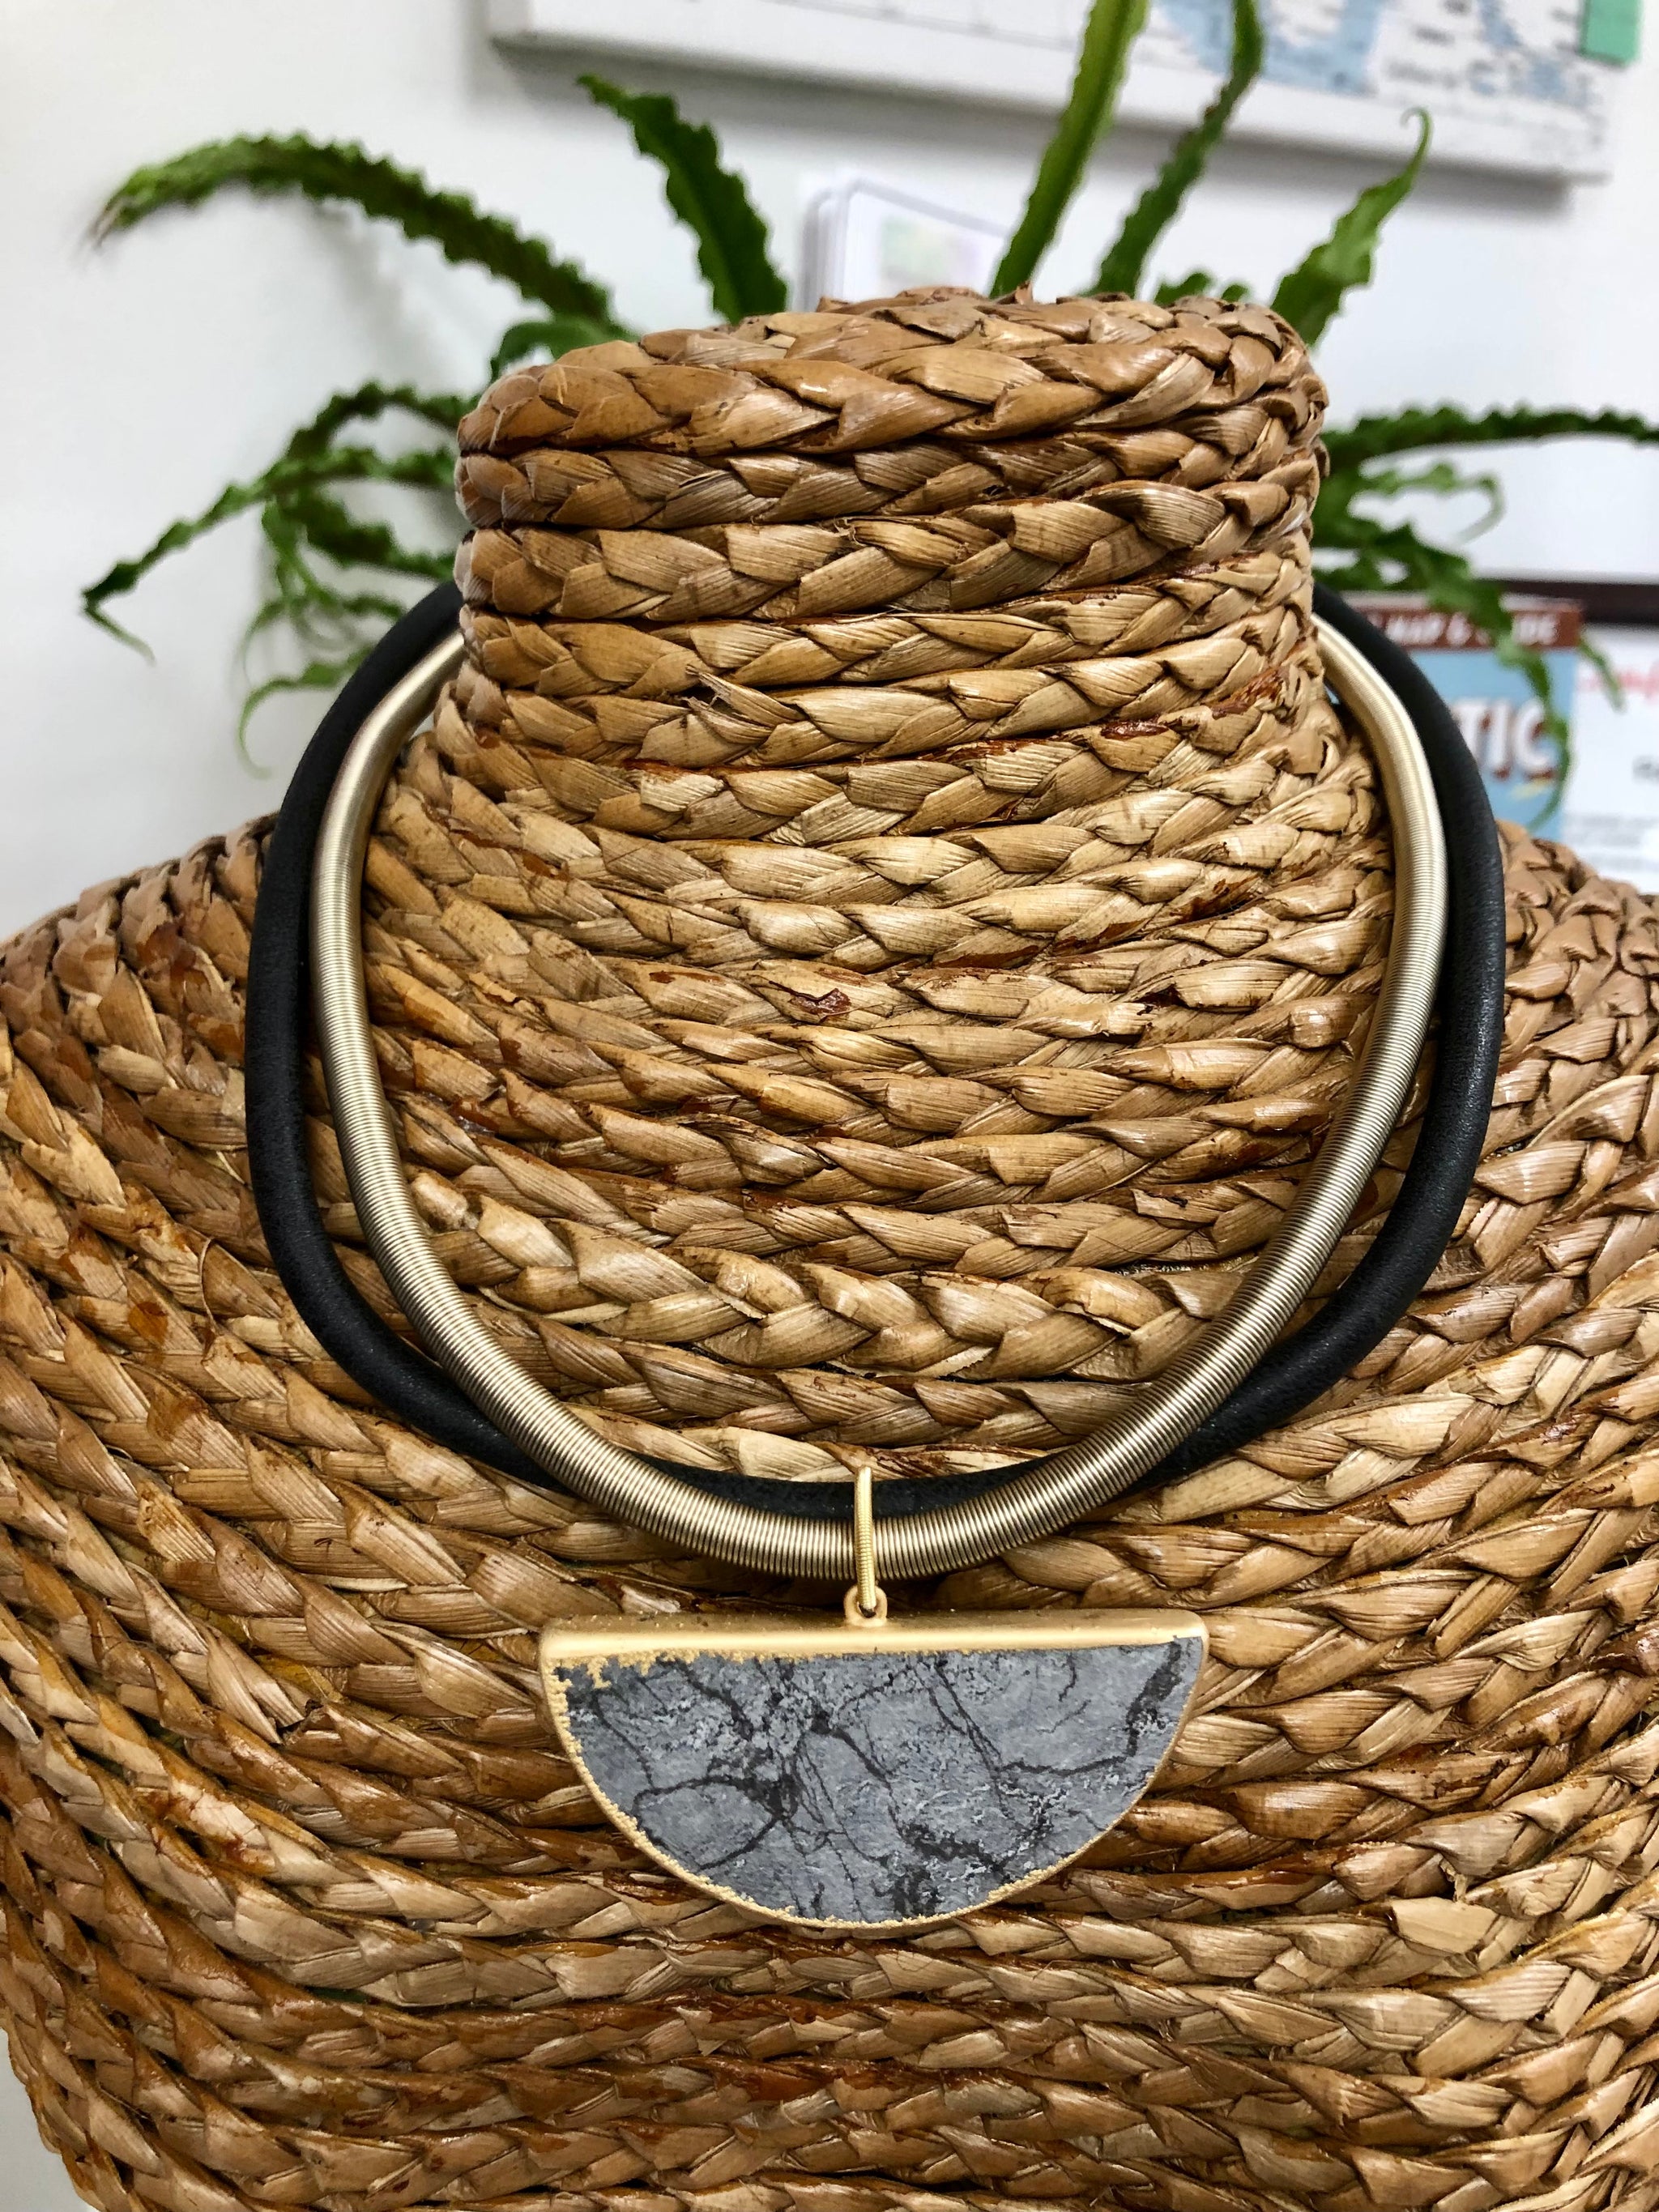 950 Black Aragonite - Black leather with gold wire necklace with half-moon aragonite pendant